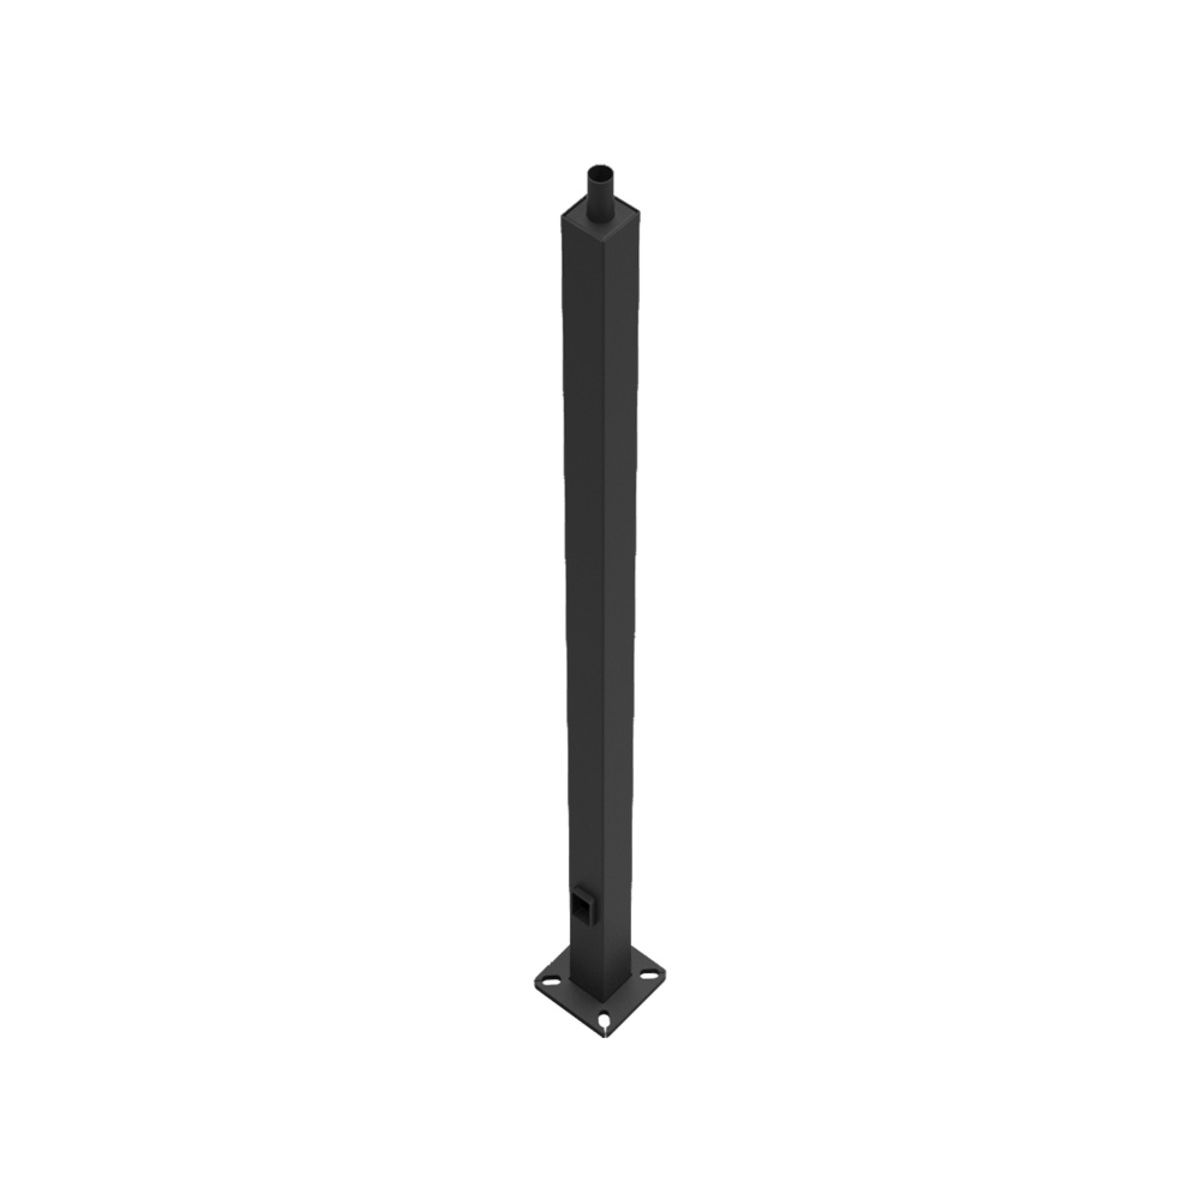 20 Ft Square Steel Tenon Top Pole 4 In. Shaft 11 Gauge